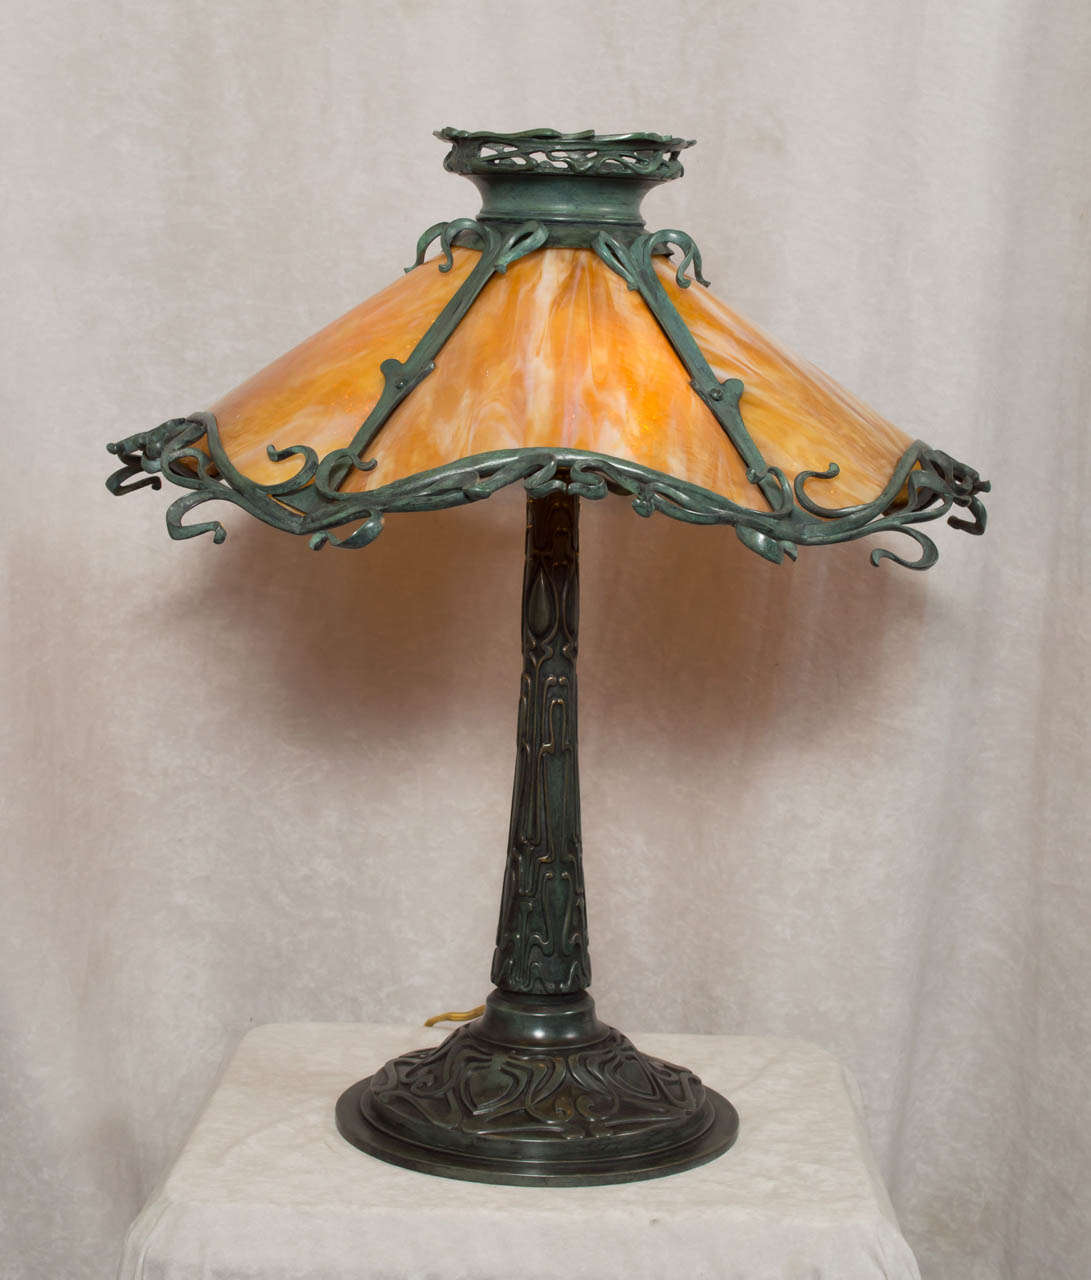 This highly unusual panel style lamp offers the highest quality workmanship that can be performed.  We guarantee this lamp to be by Gorham, known for making sterling silver, casting bronzes, as well as high quality lamps.  The rich dark green patina